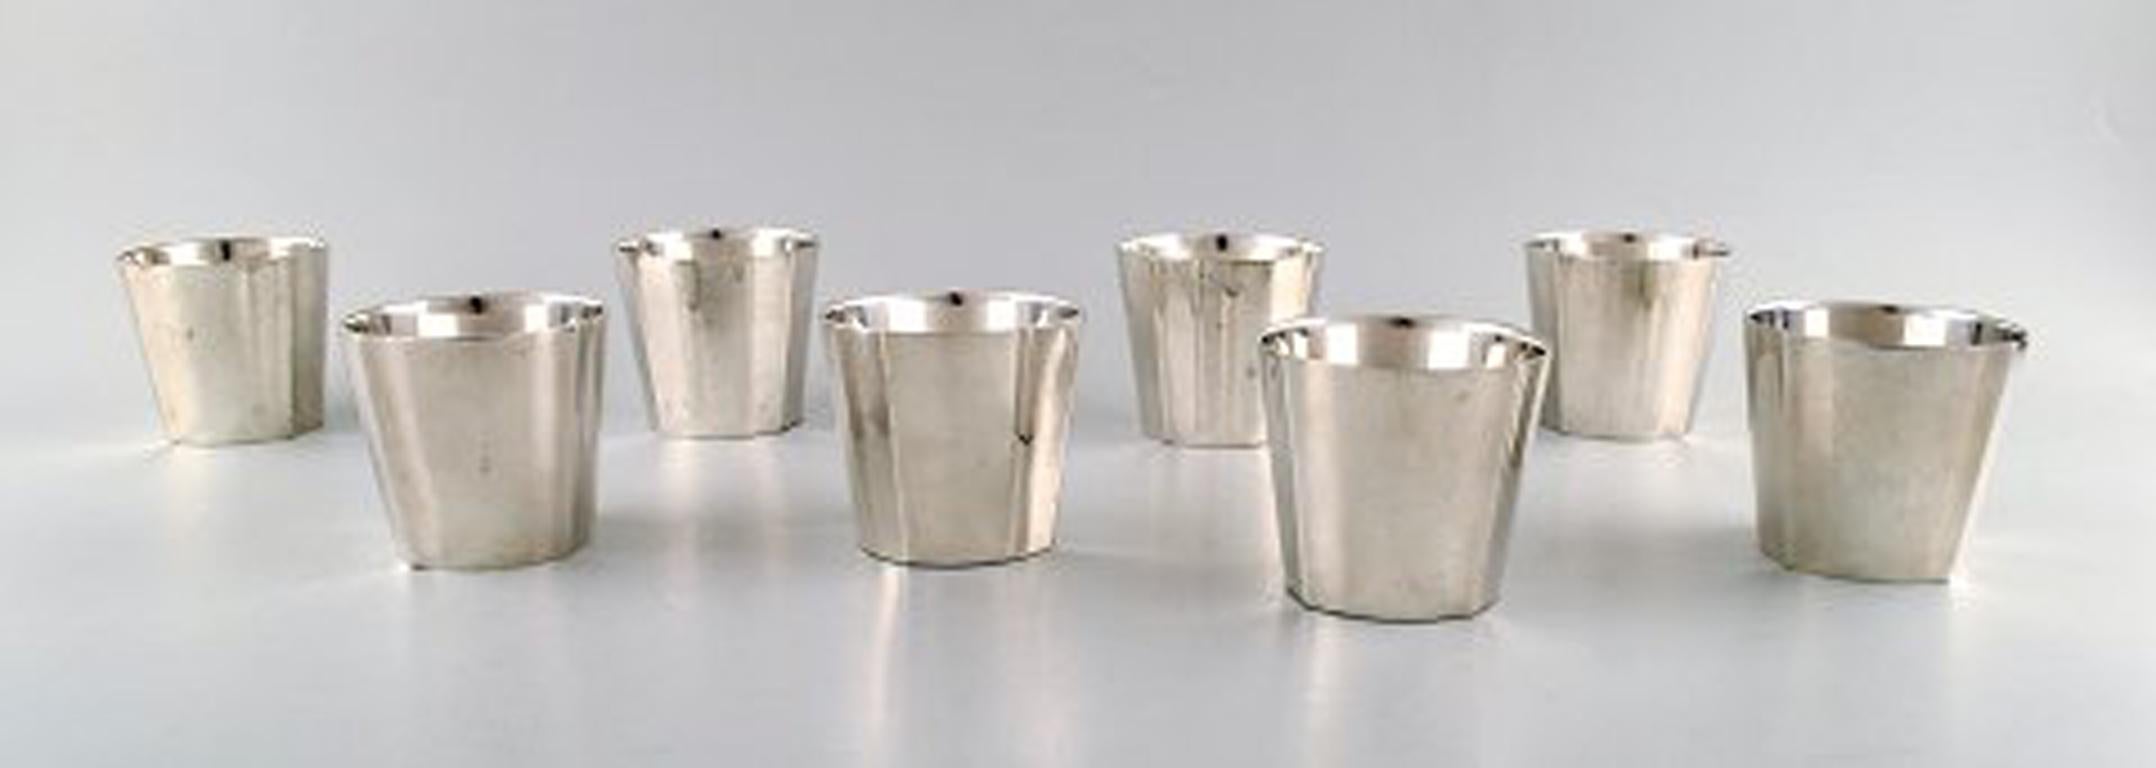 Sigvard Bernadotte for Gense. A set of 8 hunting/vodka beakers in plated silver.
Modern Swedish design, 1960s.
Stamped.
In perfect condition.
Measures: 8 cm x 7 cm.